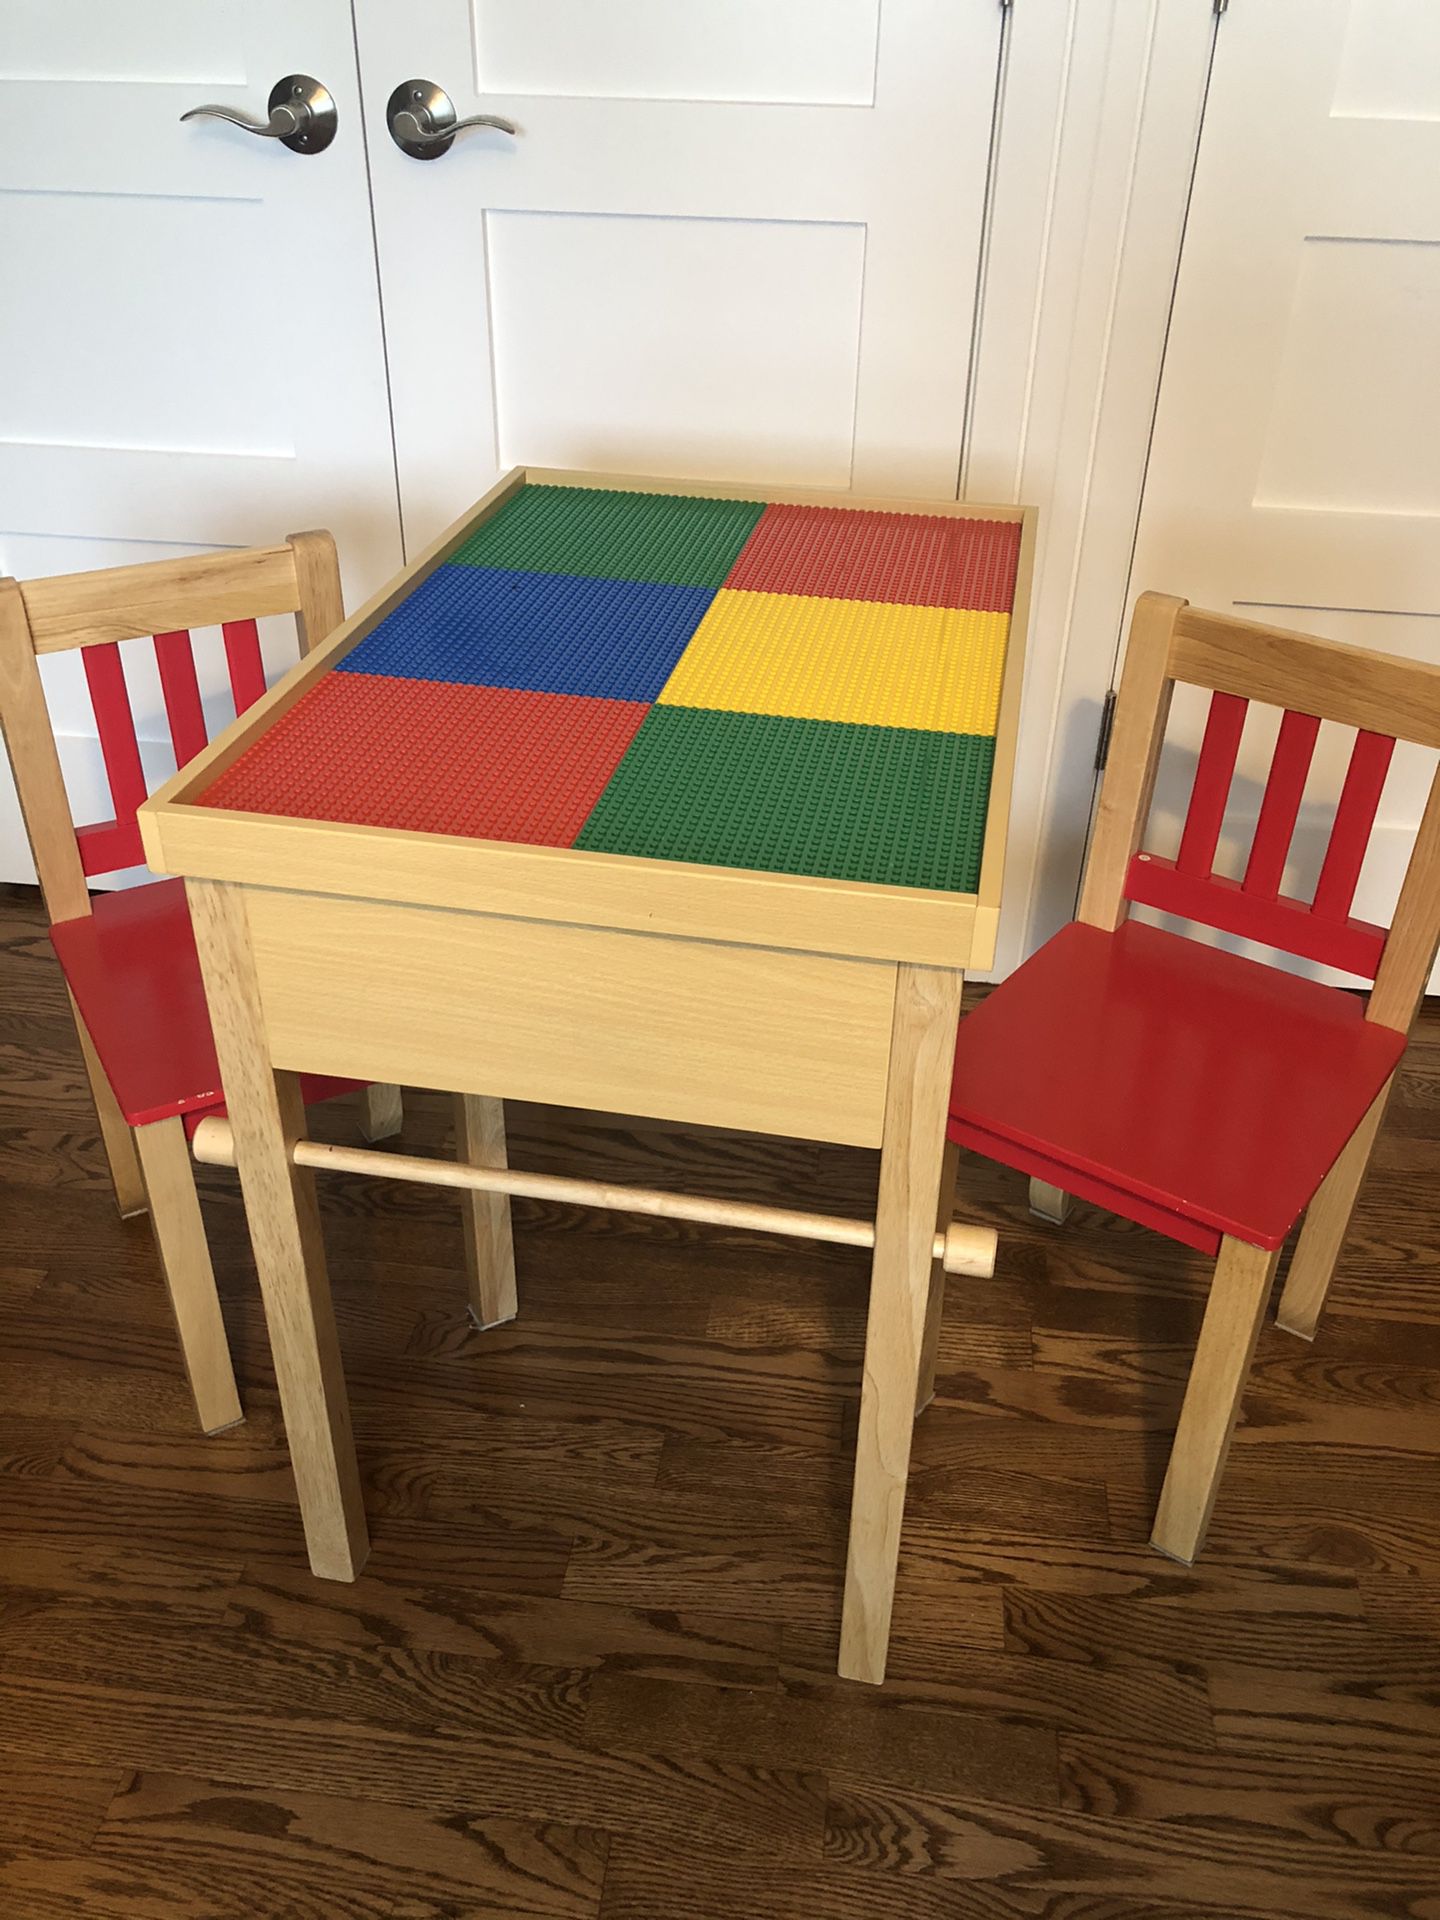 Wooden Multi function kids table with chairs